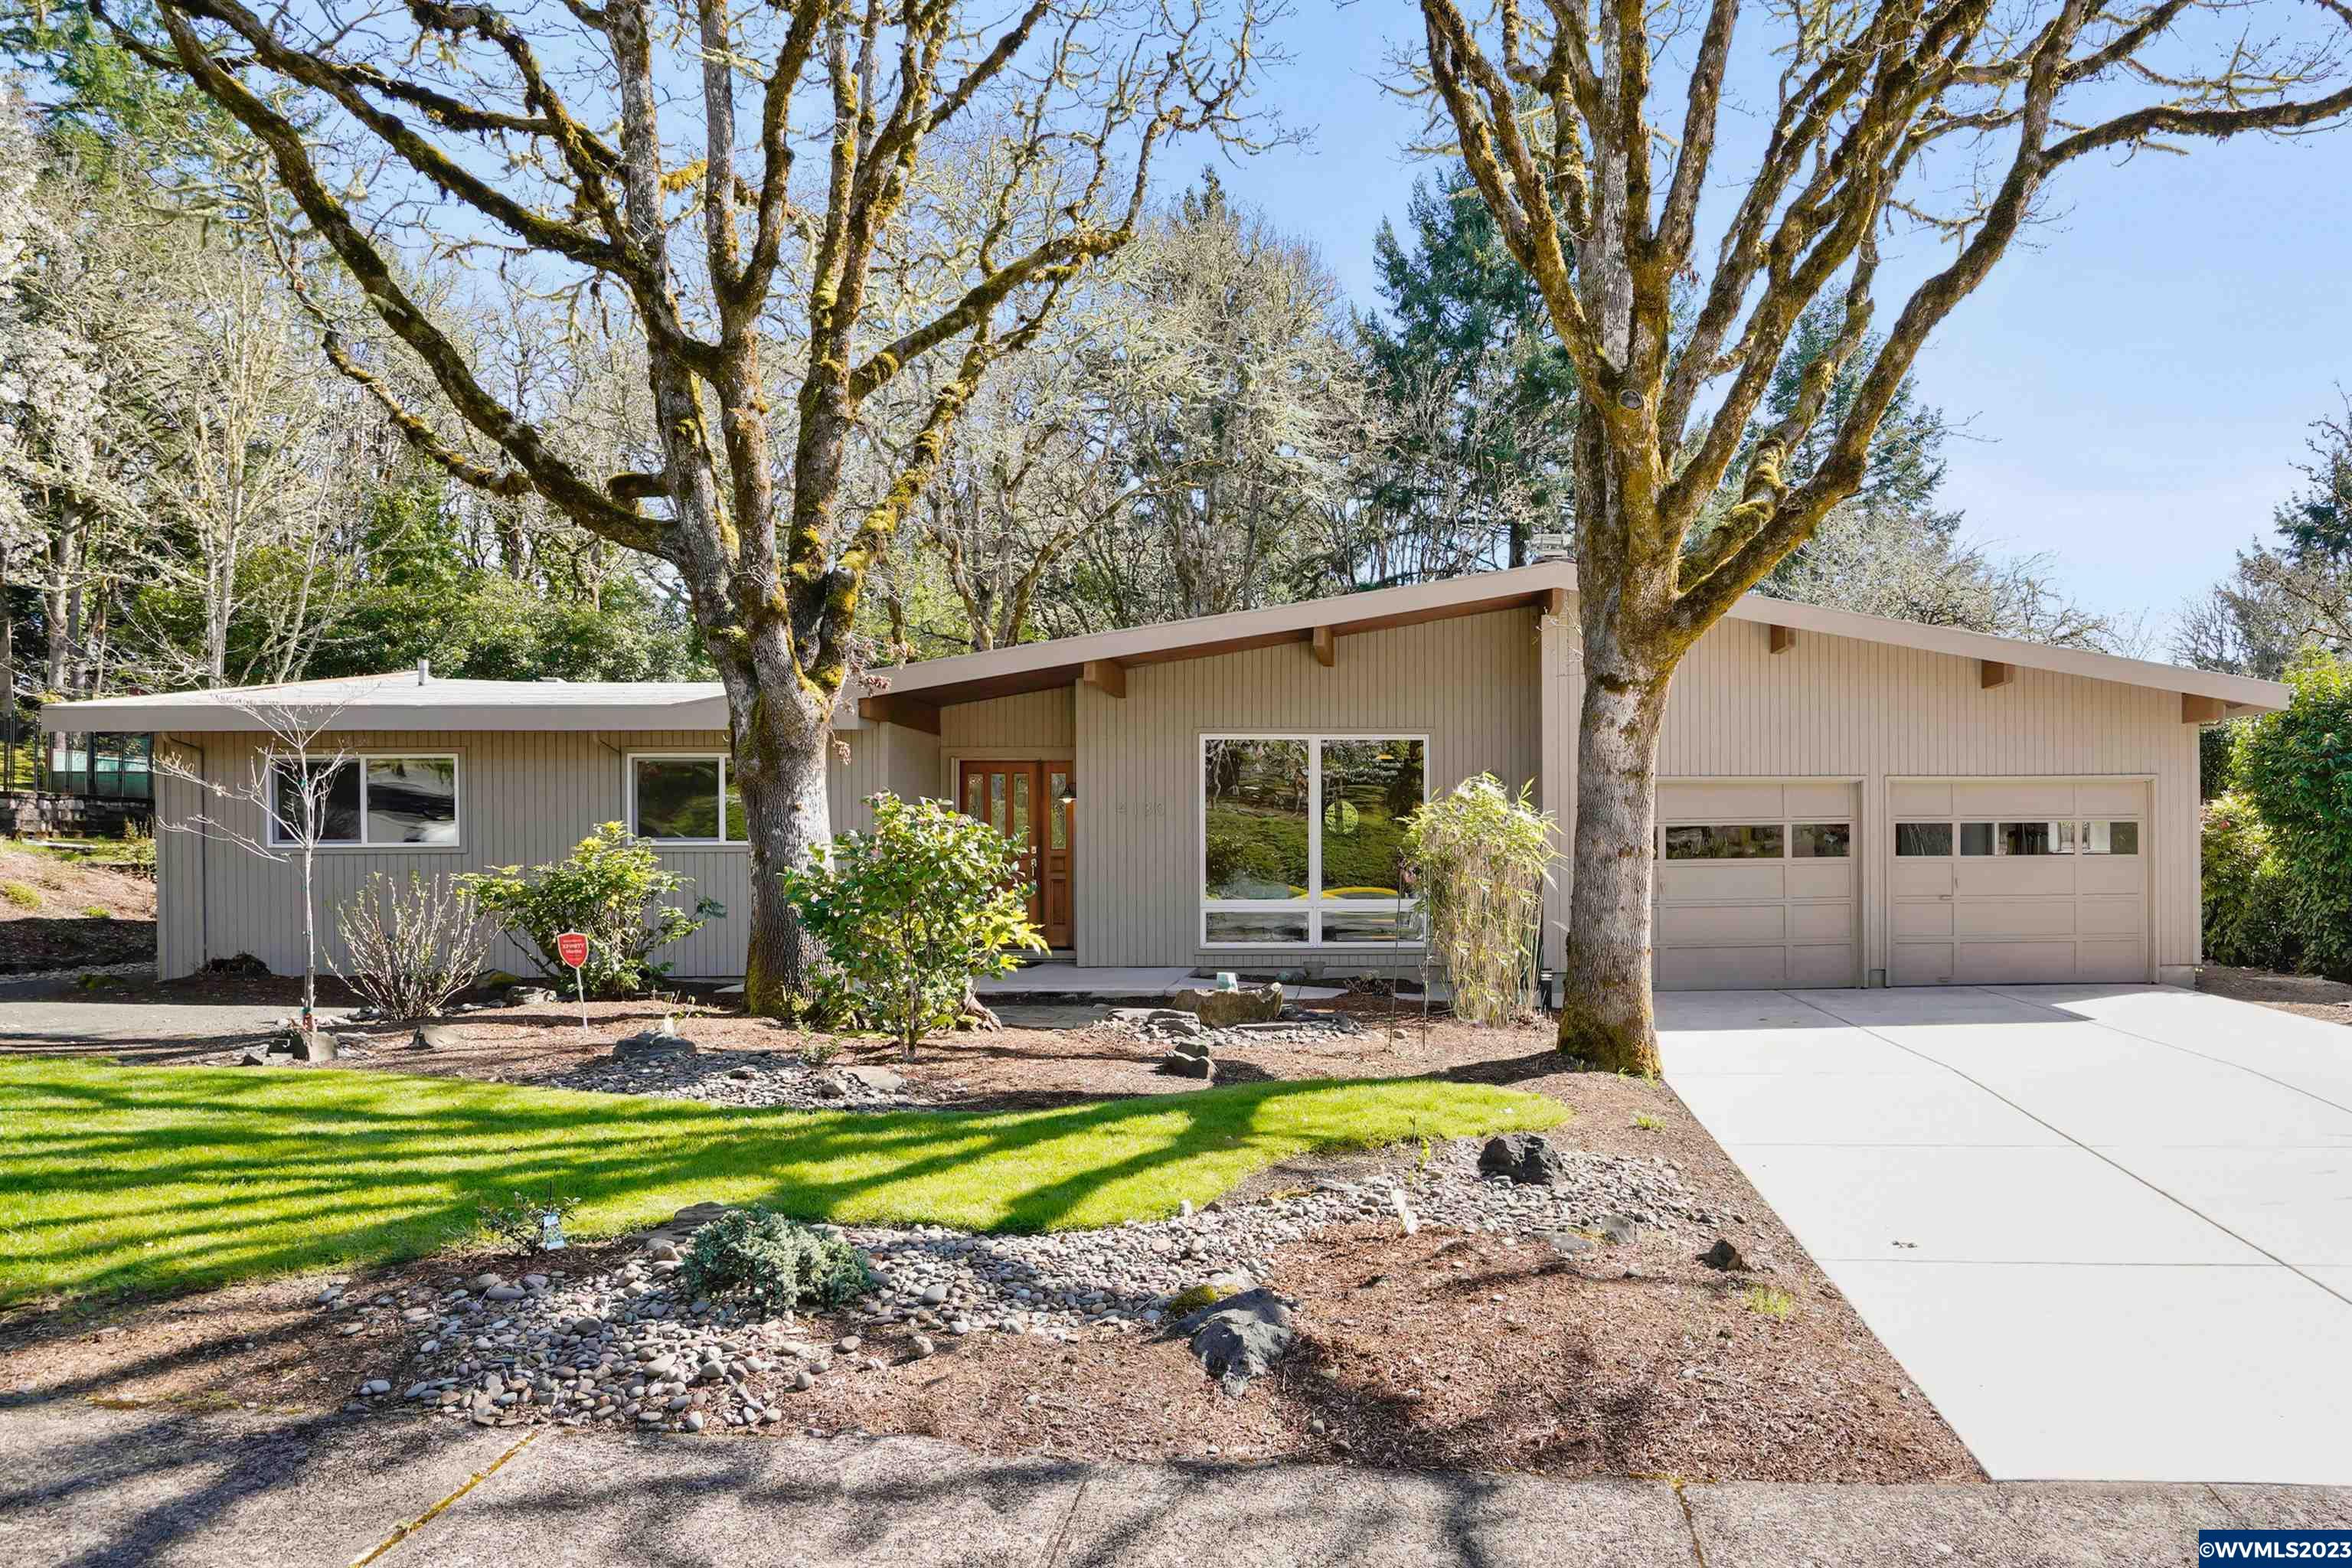 4130 NW Dale Dr, Corvallis, OR 97330